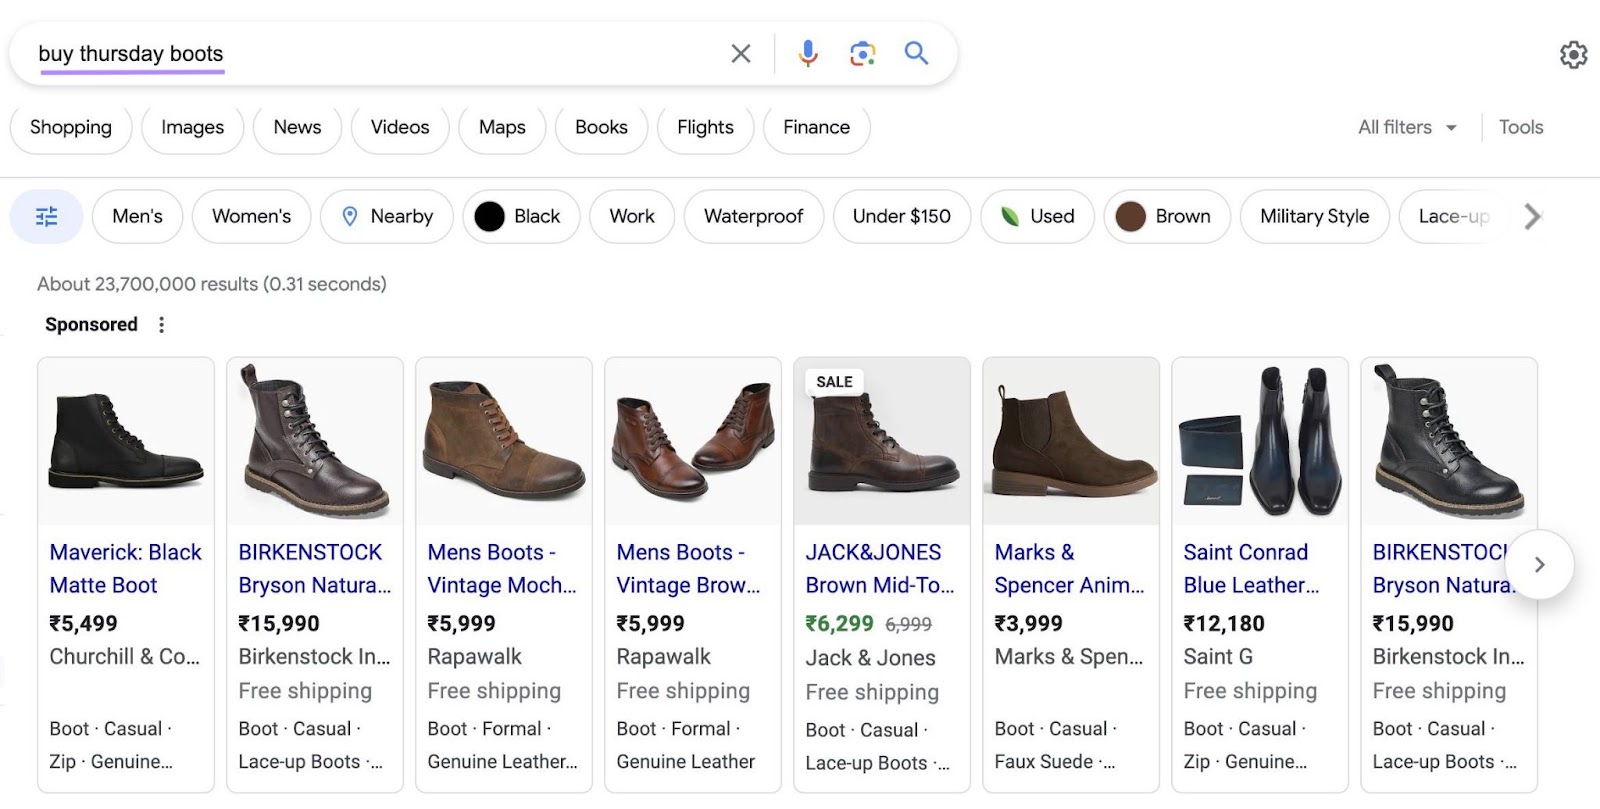 Google shopping ads appearing for “buy thursday boots" query